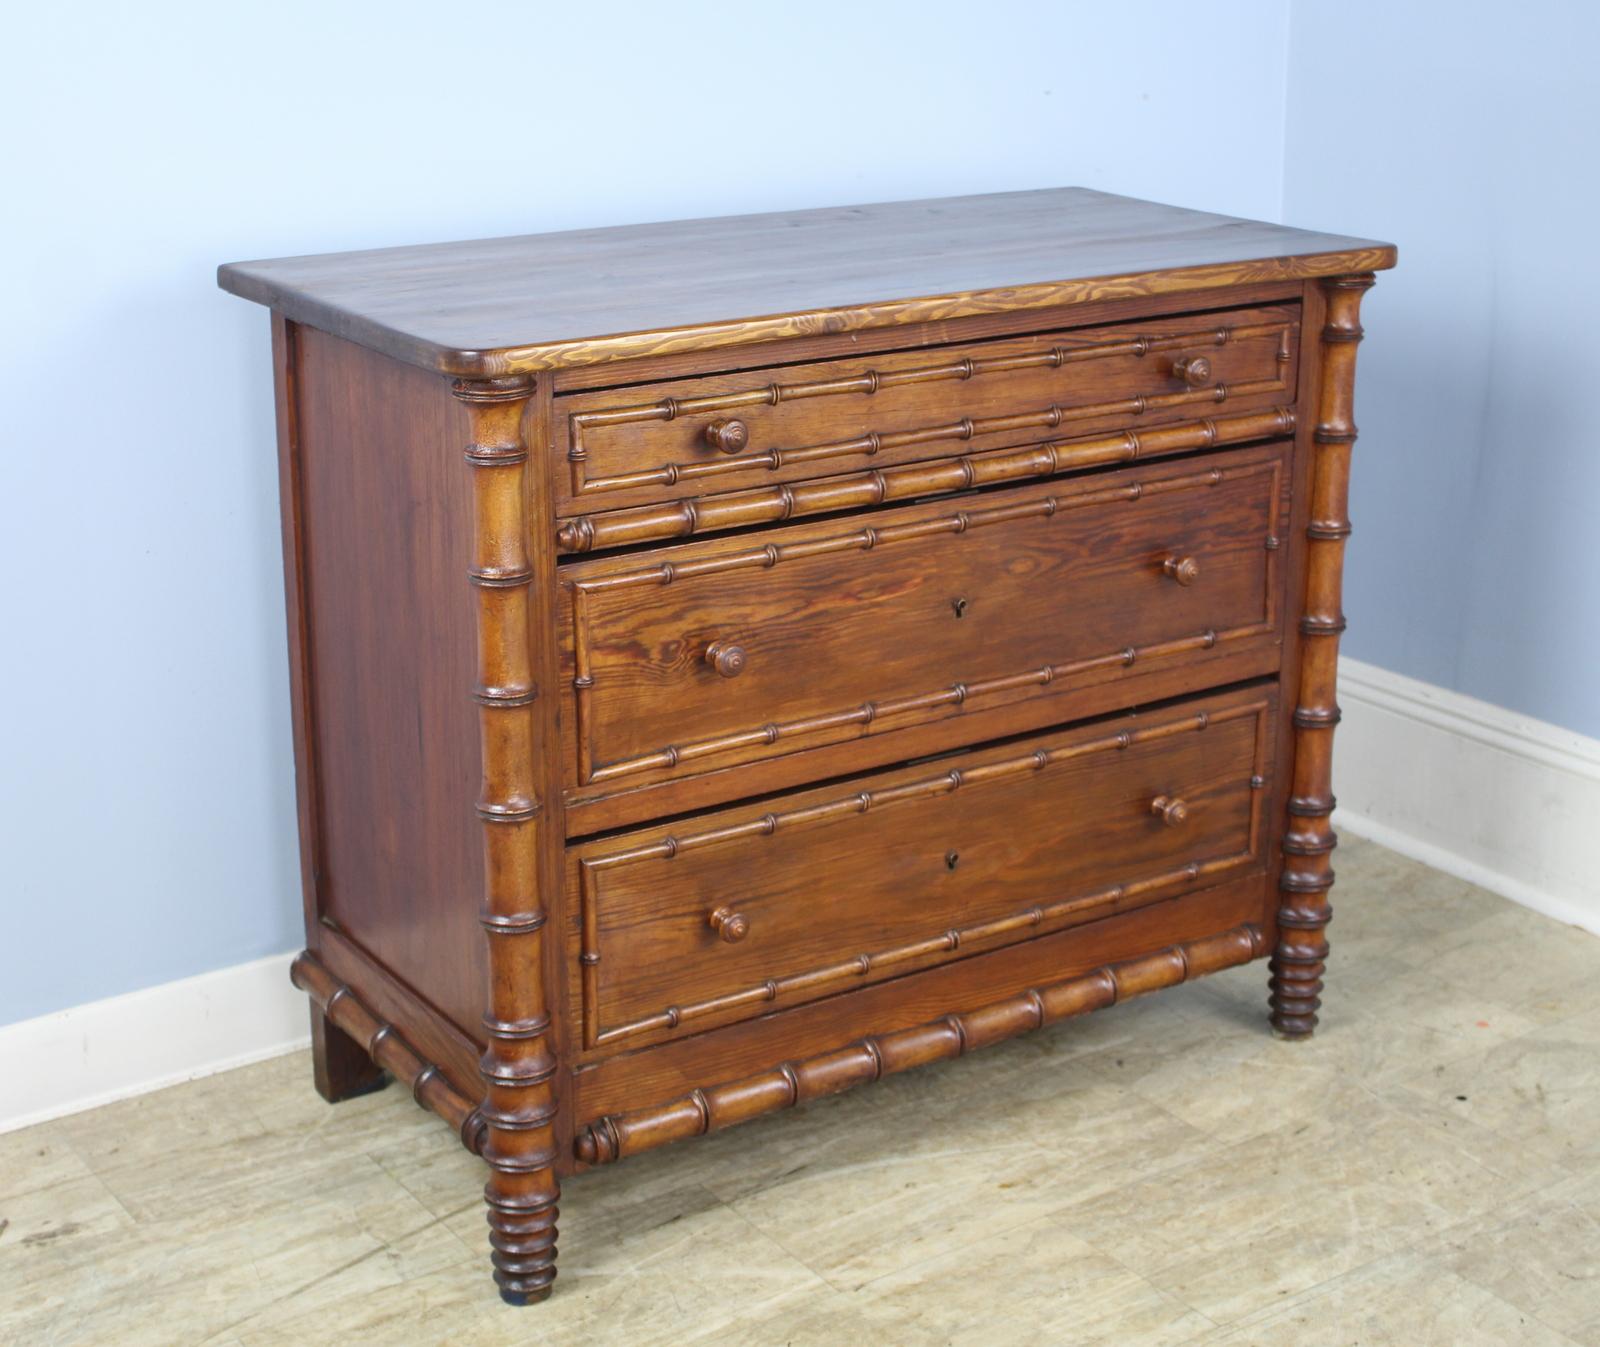 A charming chest of drawers with faux bamboo columns and mouldings. Three roomy drawers with lots of applied faux bamboo detail in good condition.